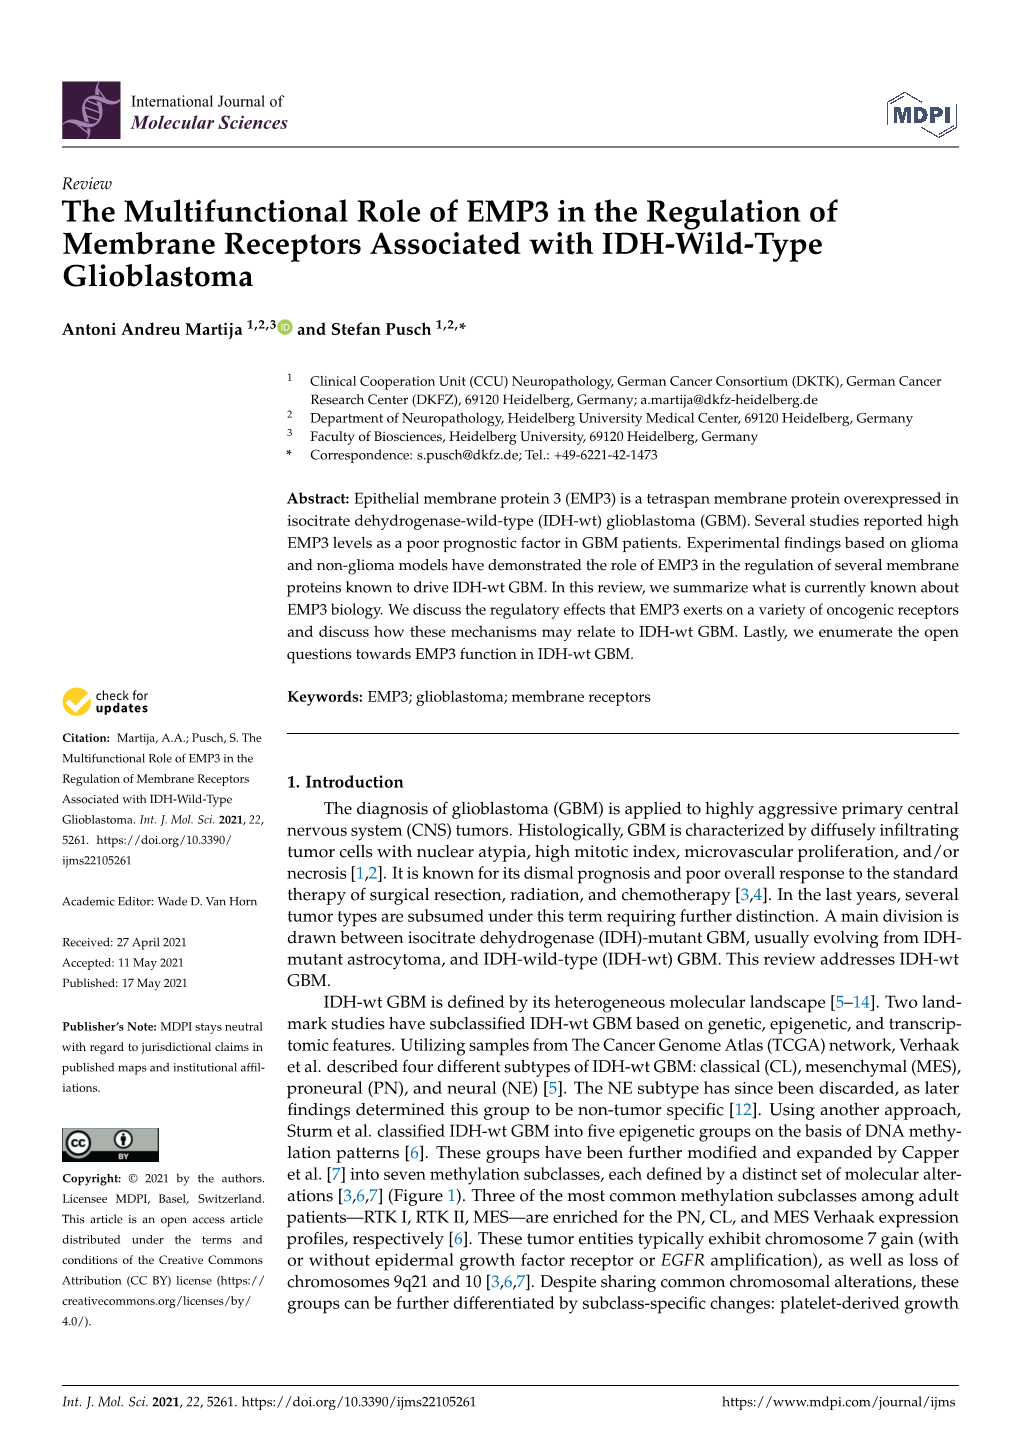 The Multifunctional Role of EMP3 in the Regulation of Membrane Receptors Associated with IDH-Wild-Type Glioblastoma